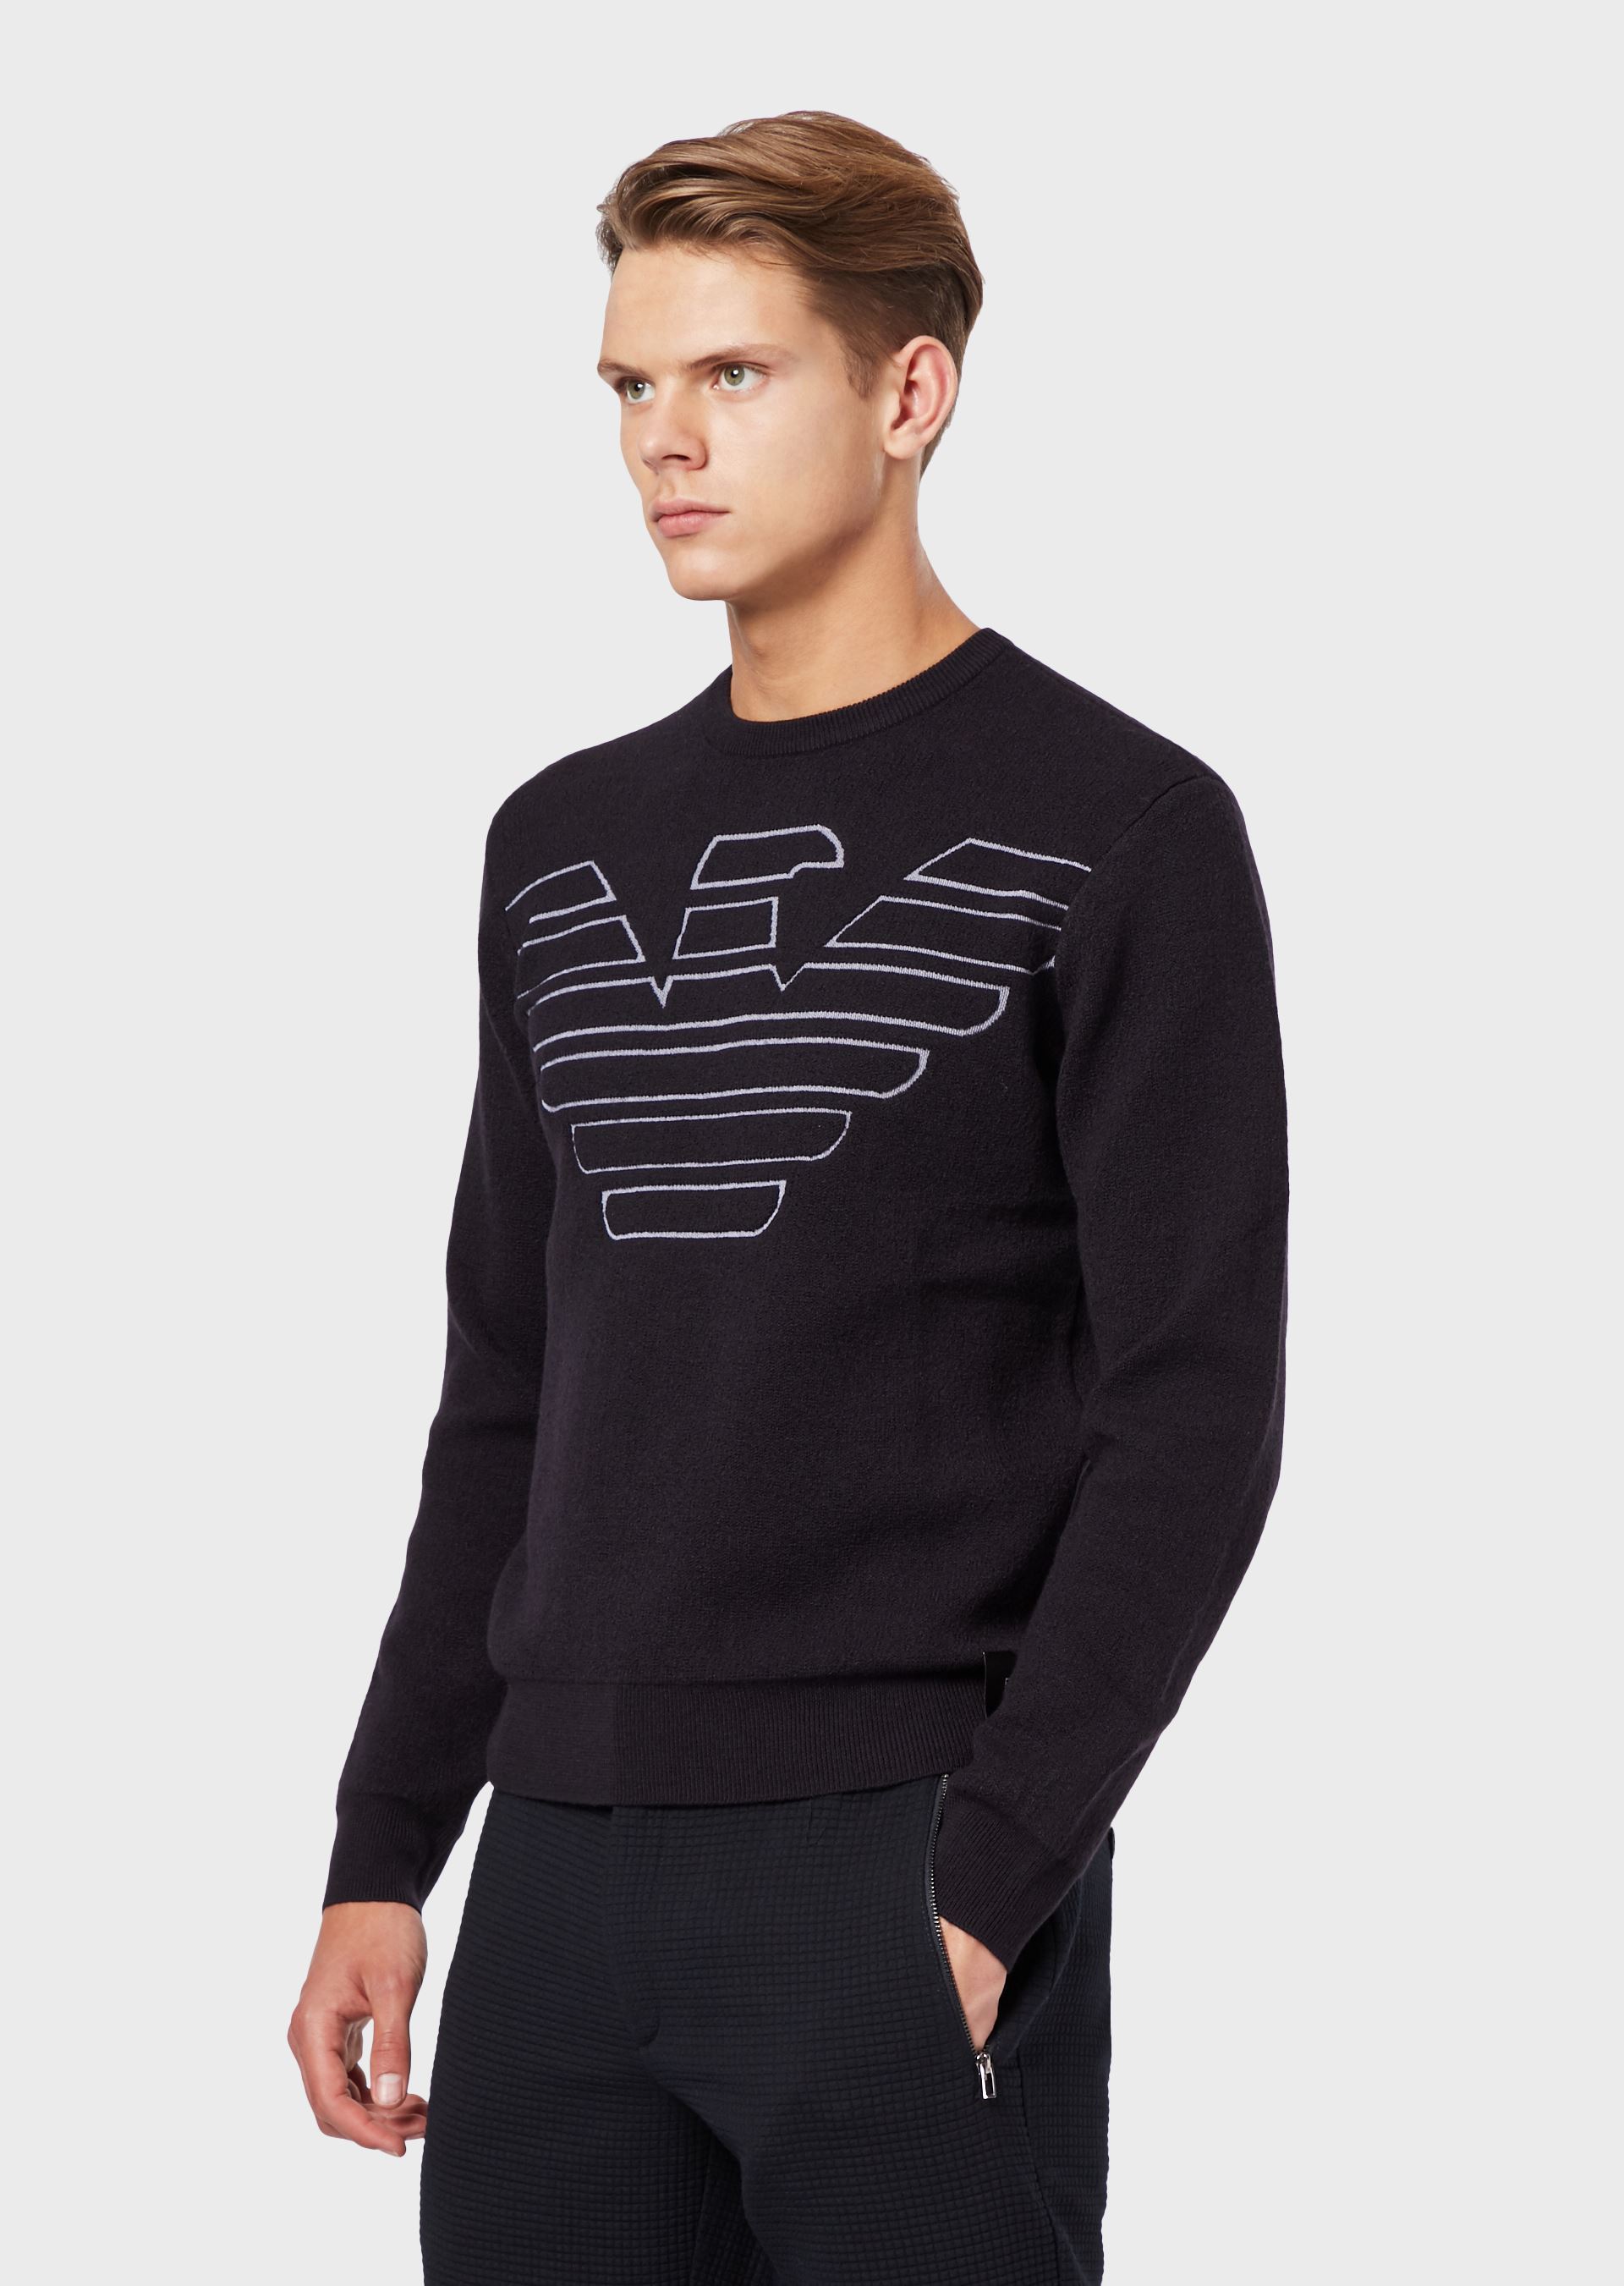 Wool-blend sweater with stylised jacquard pattern | Man | Emporio Armani